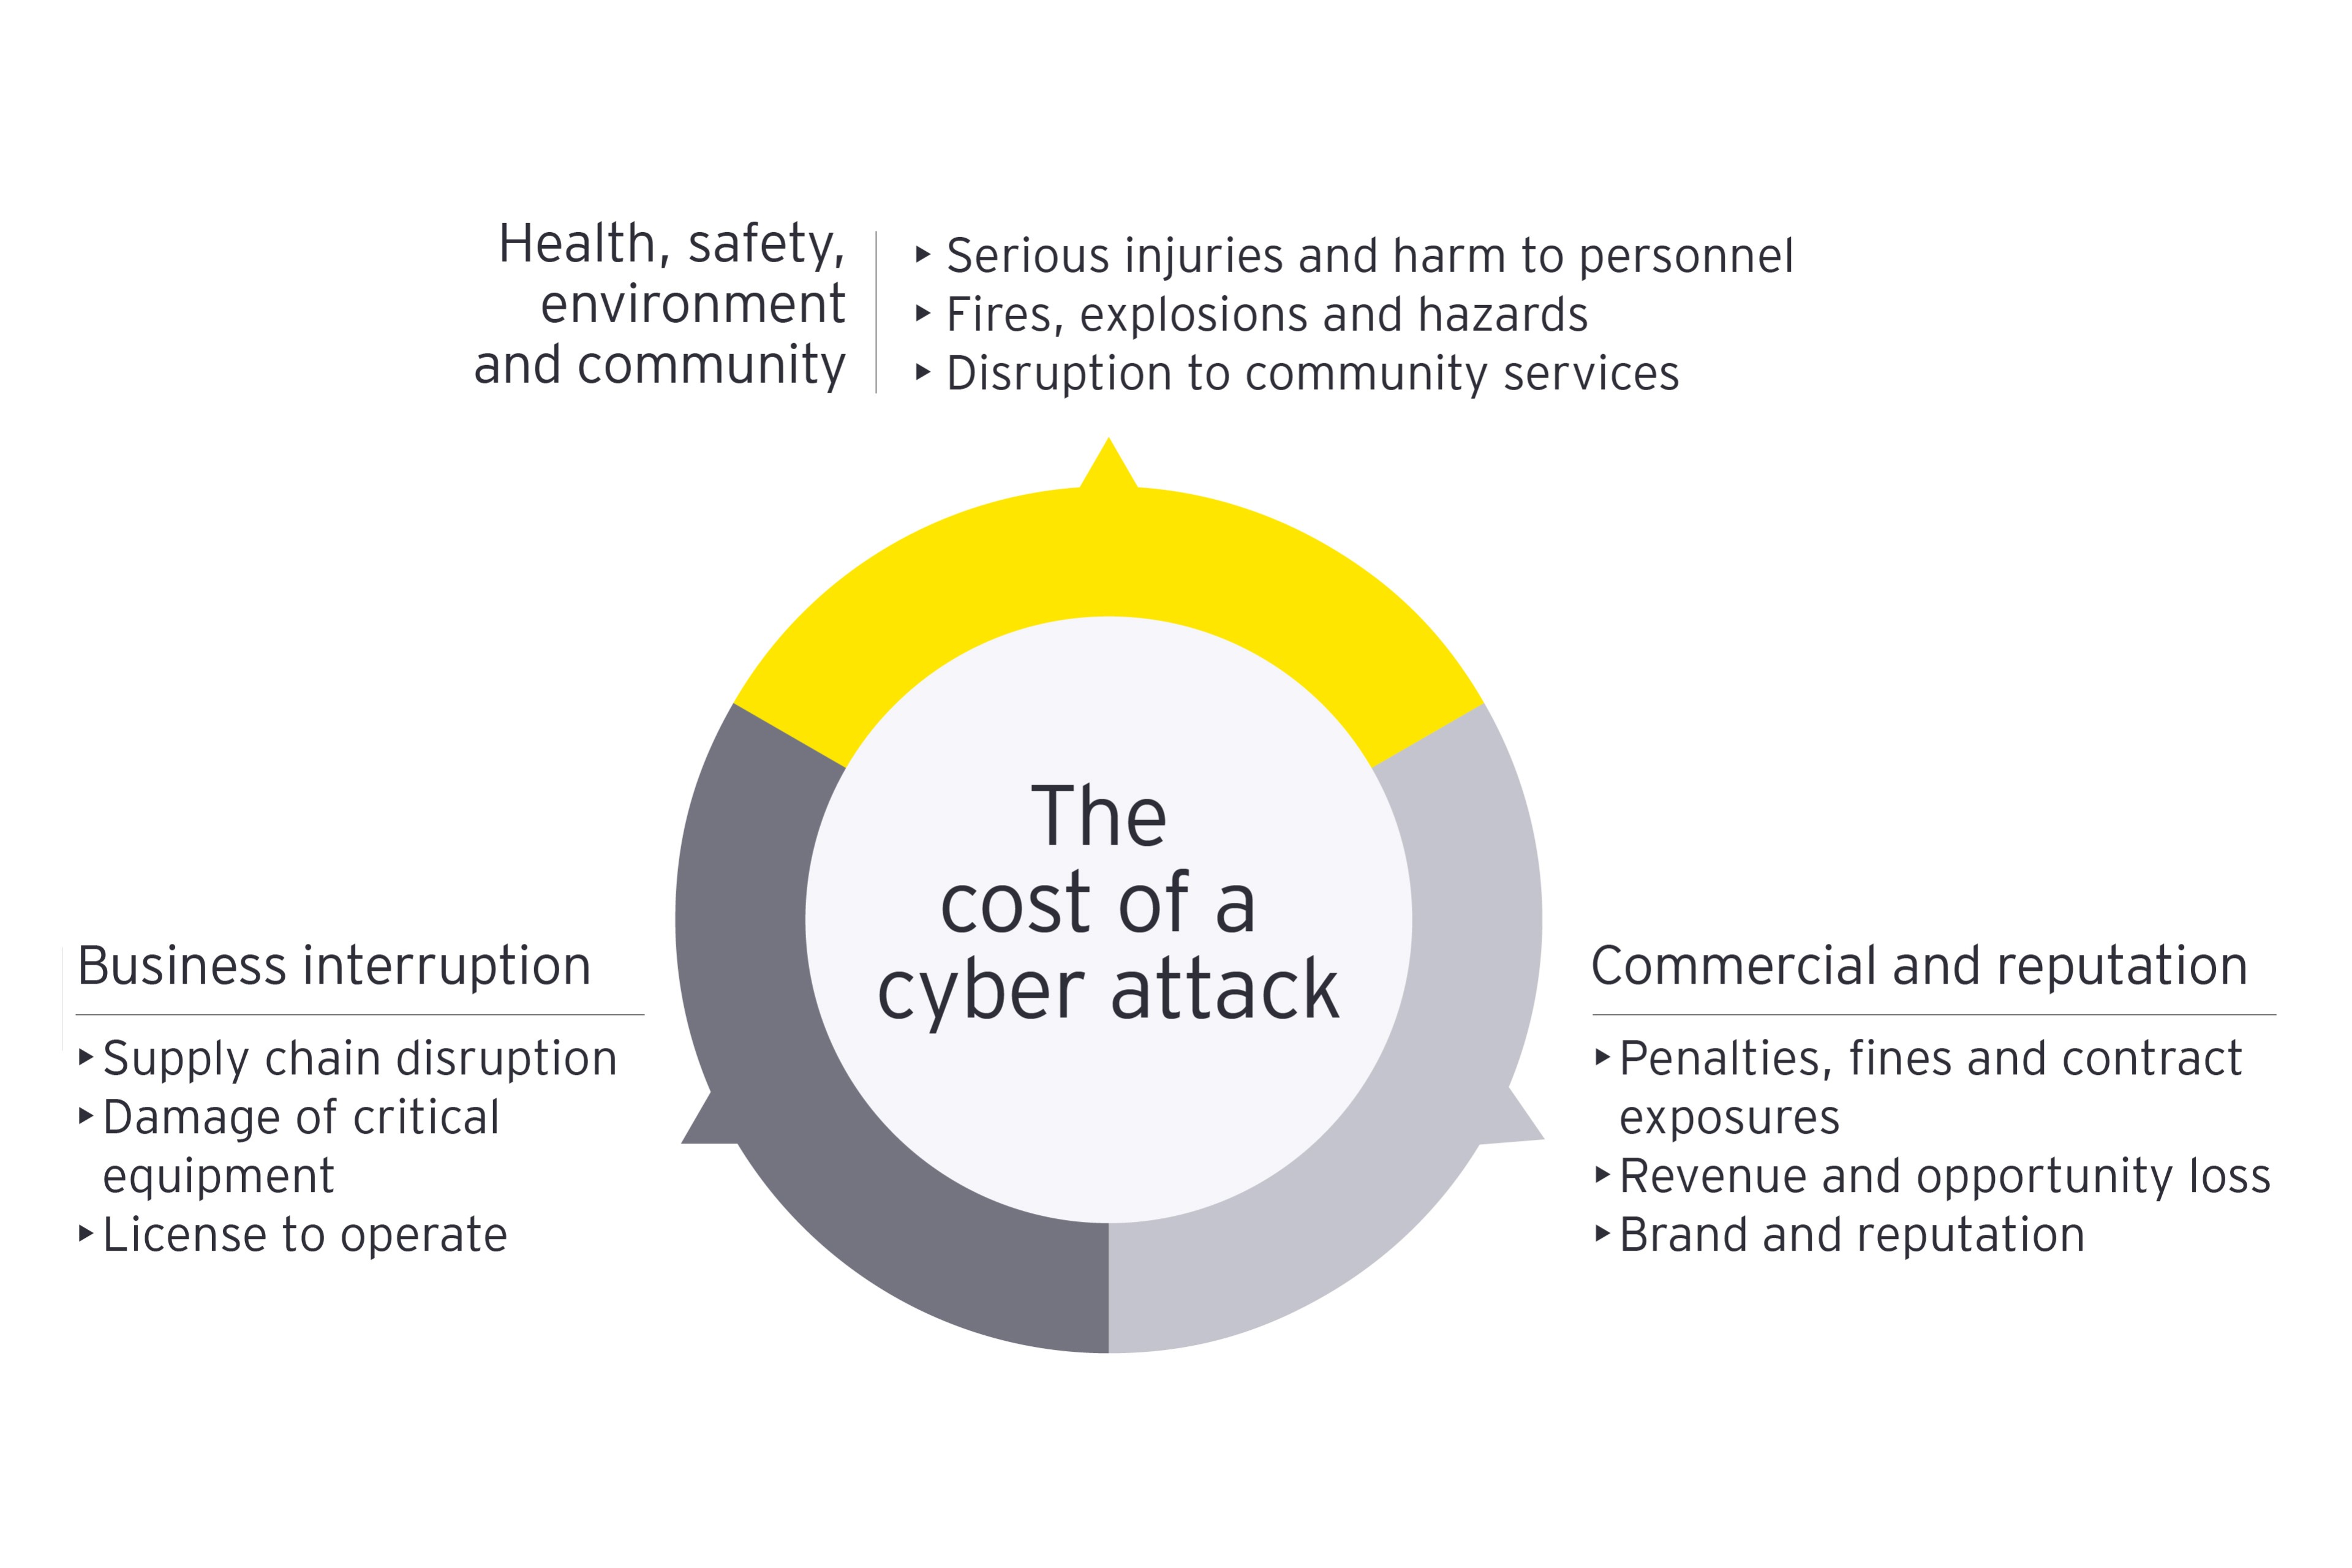 The cost of a cyber attack